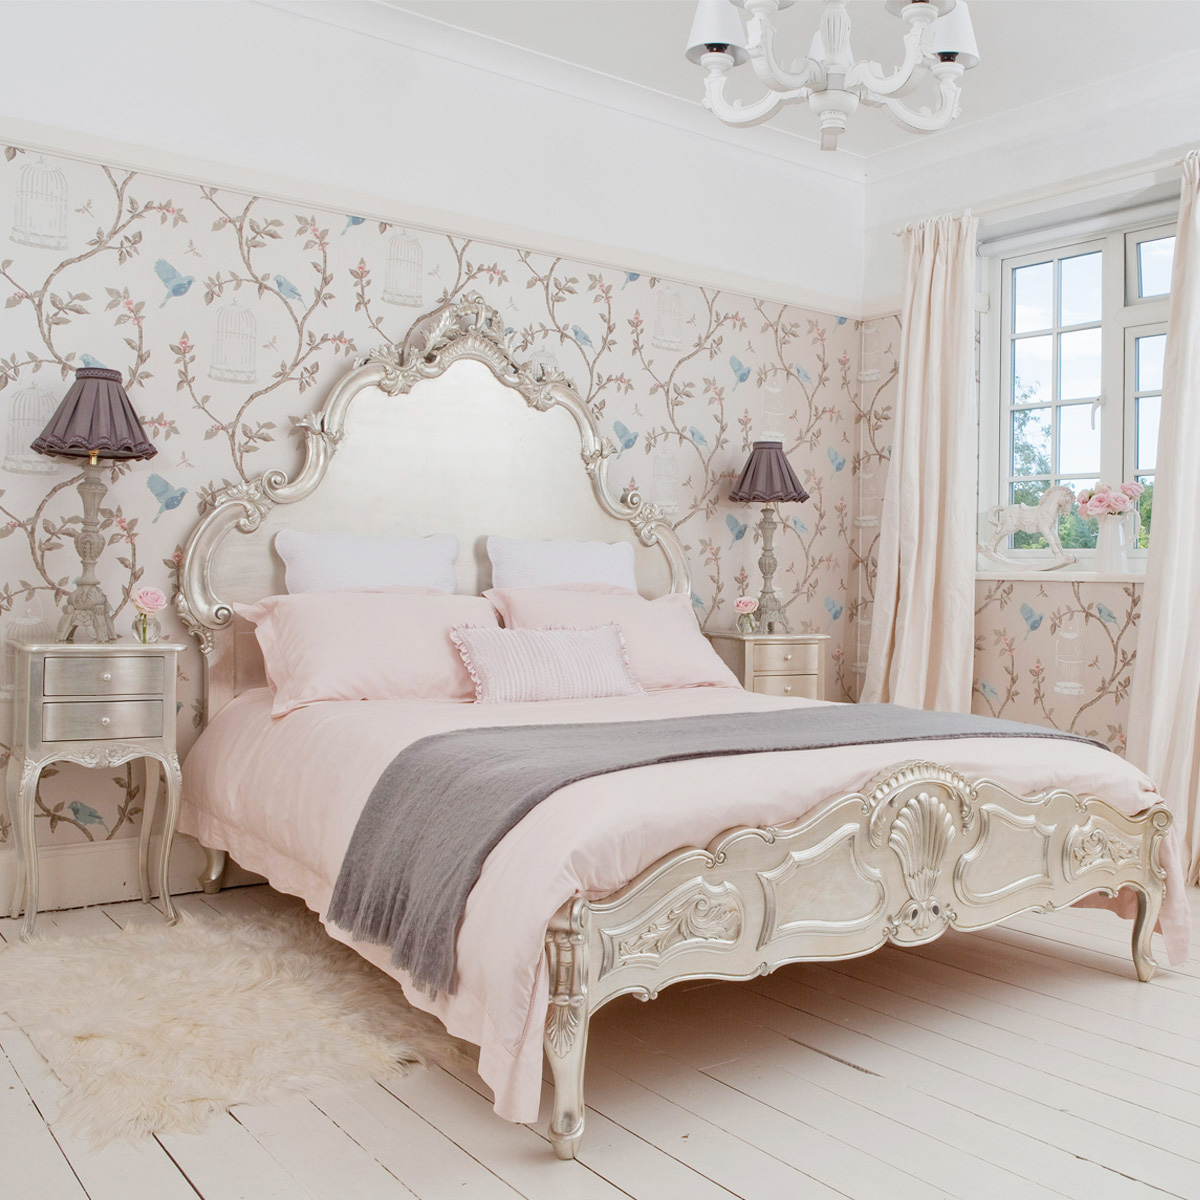 Luxury French Bedroom Furniture - The French Bedroom Company